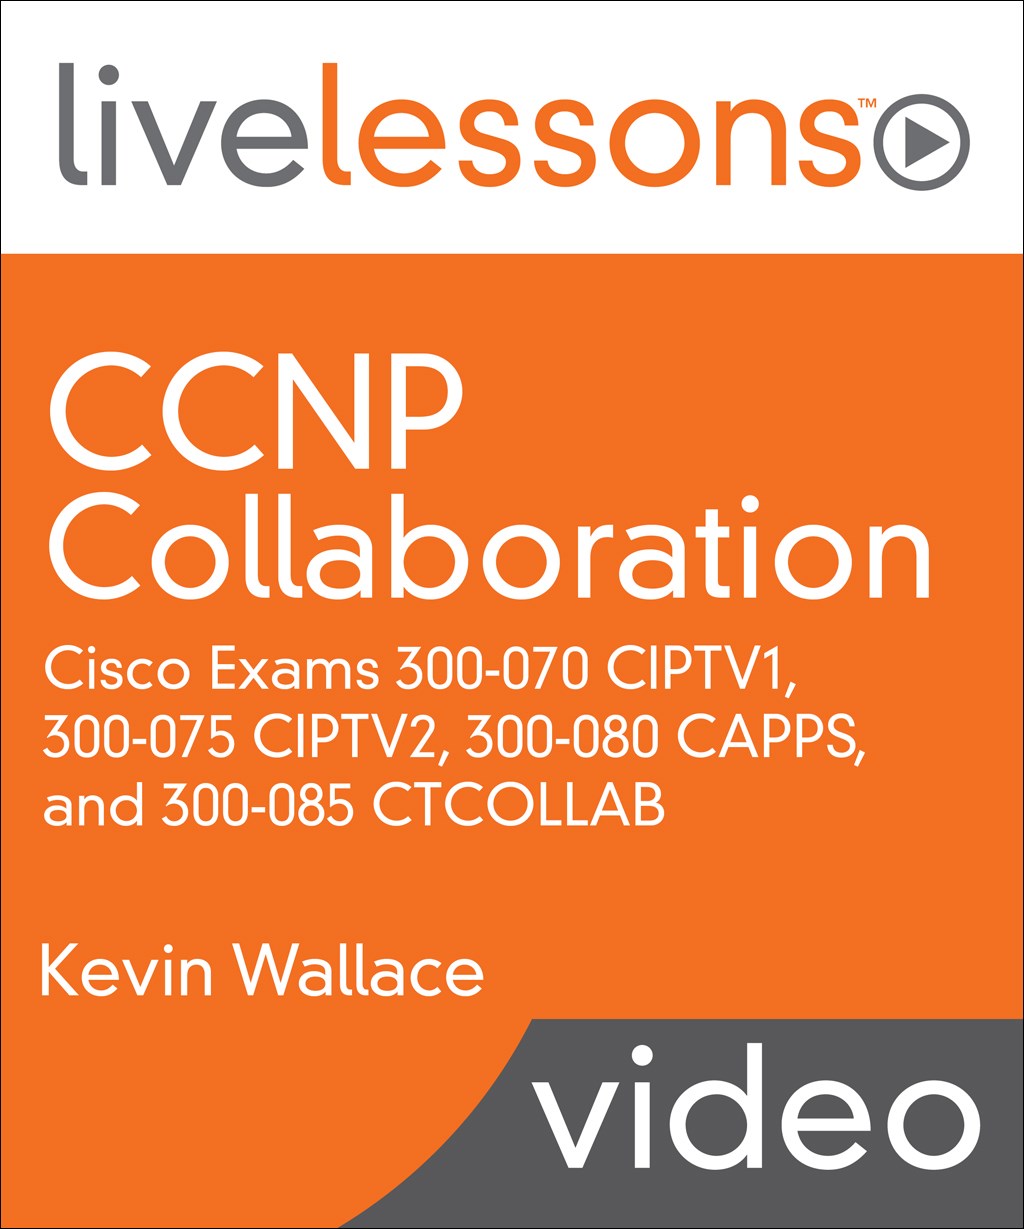 CCNP Collaboration LiveLessons: Cisco Exams 300-070 CIPTV1, 300-075 CIPTV2, 300-080 CAPPS, and 300-085 CTCOLLAB